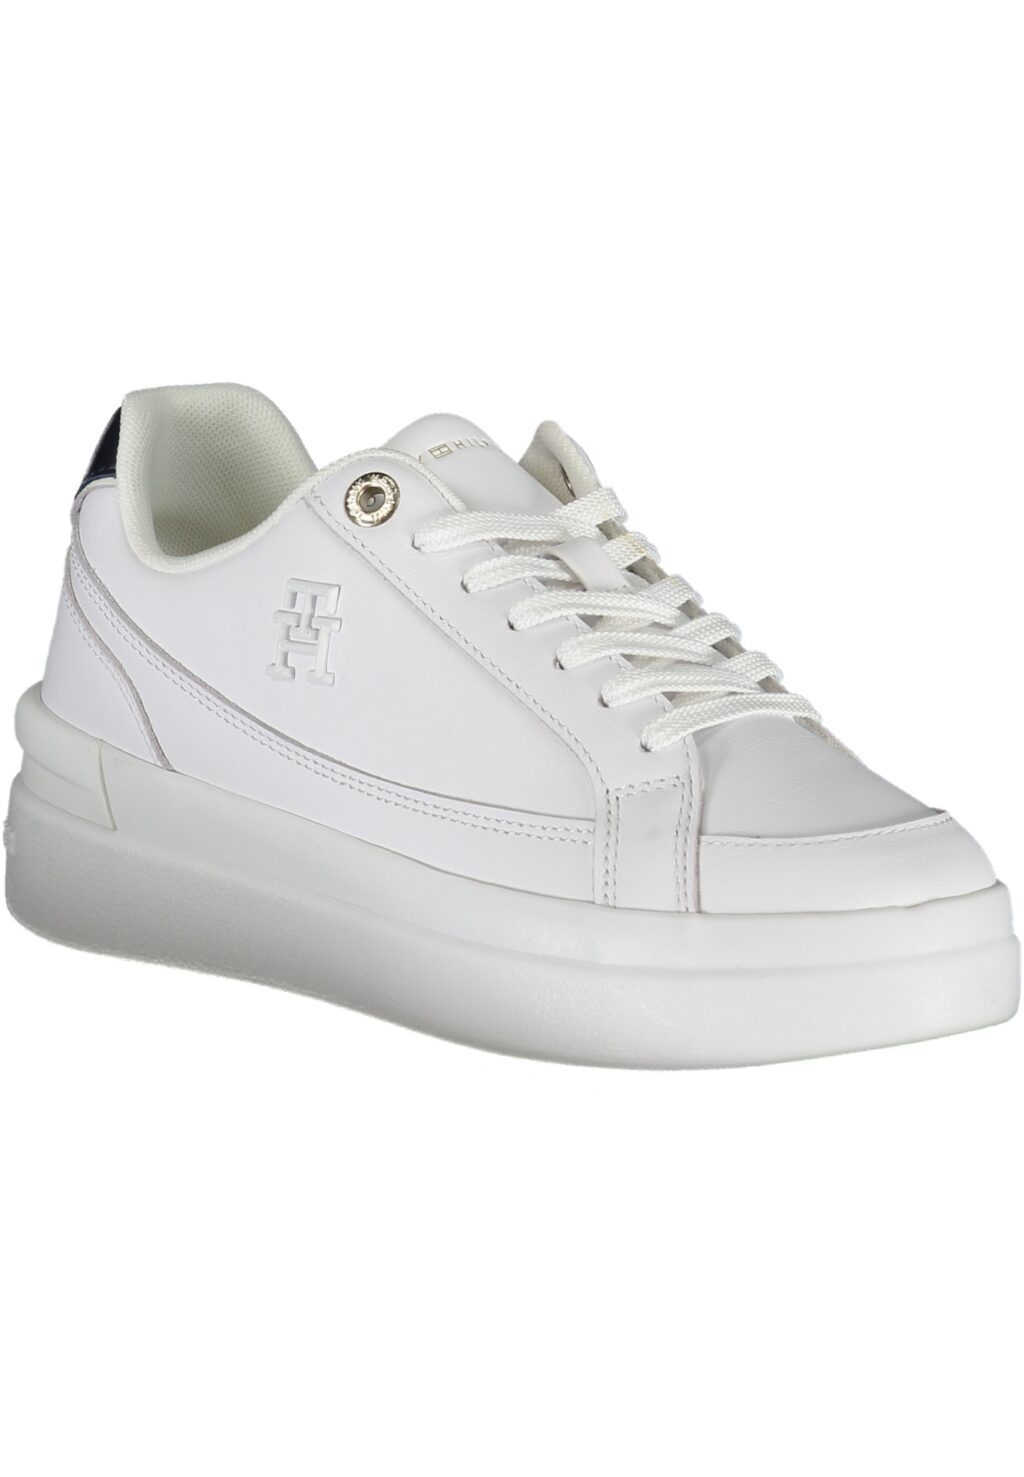 TOMMY HILFIGER WHITE WOMEN'S SPORTS SHOES FW0FW07568F_BIYBS